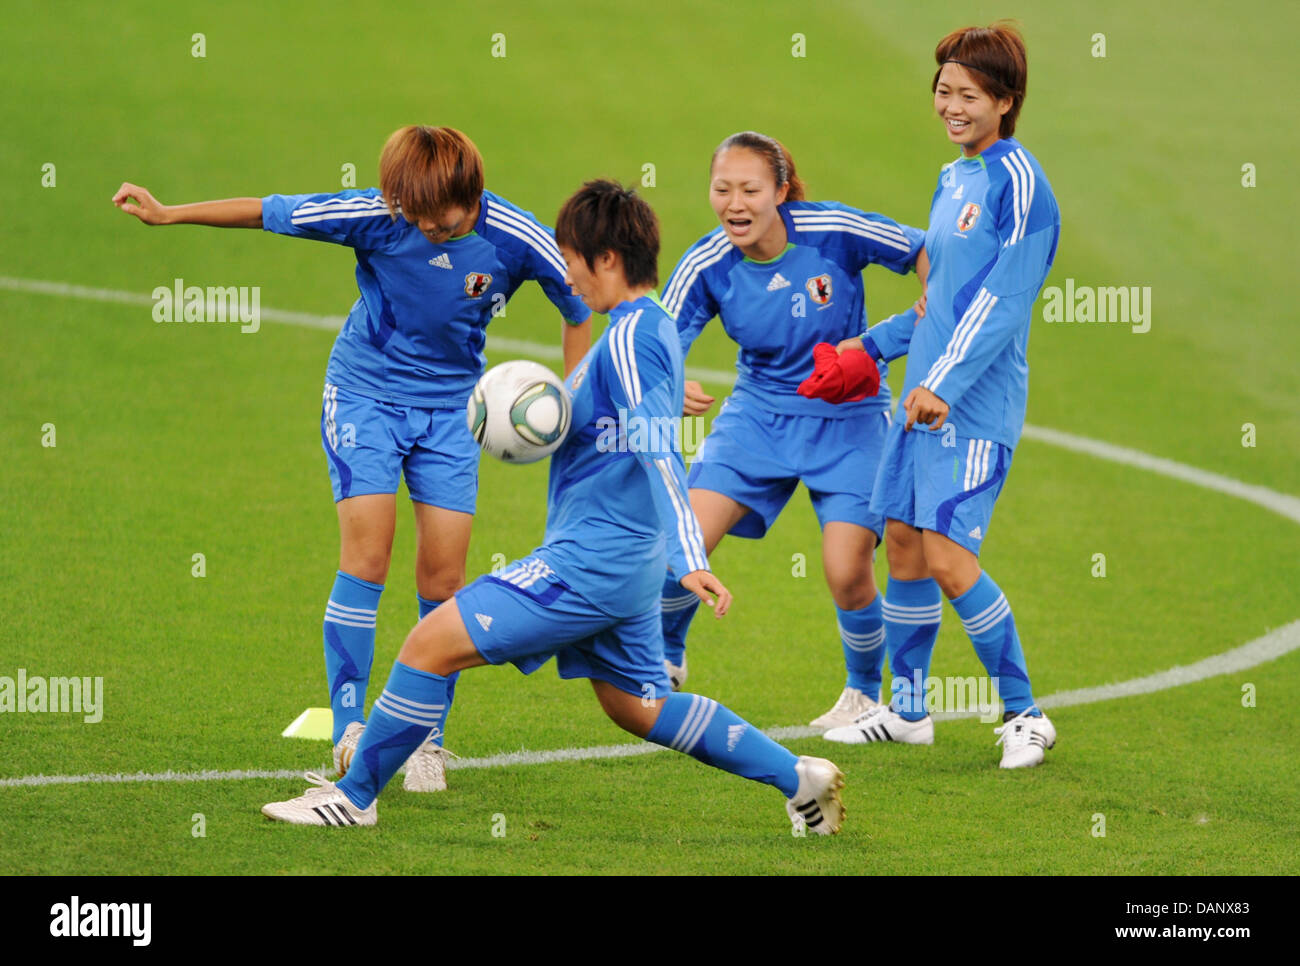 Asuna Tanaka (l-r), Megumi Takase, Karina Maruyama and Kozue Ando of Japan fight for the ball during a training session of the team in Frankfurt, Germany 12 July 2011. Japan faces Sweden in the semi-final match of the FIFA Women's World Cup in Frankfurt on 13 July 2011. Foto: Arne Dedert dpa/lhe Stock Photo